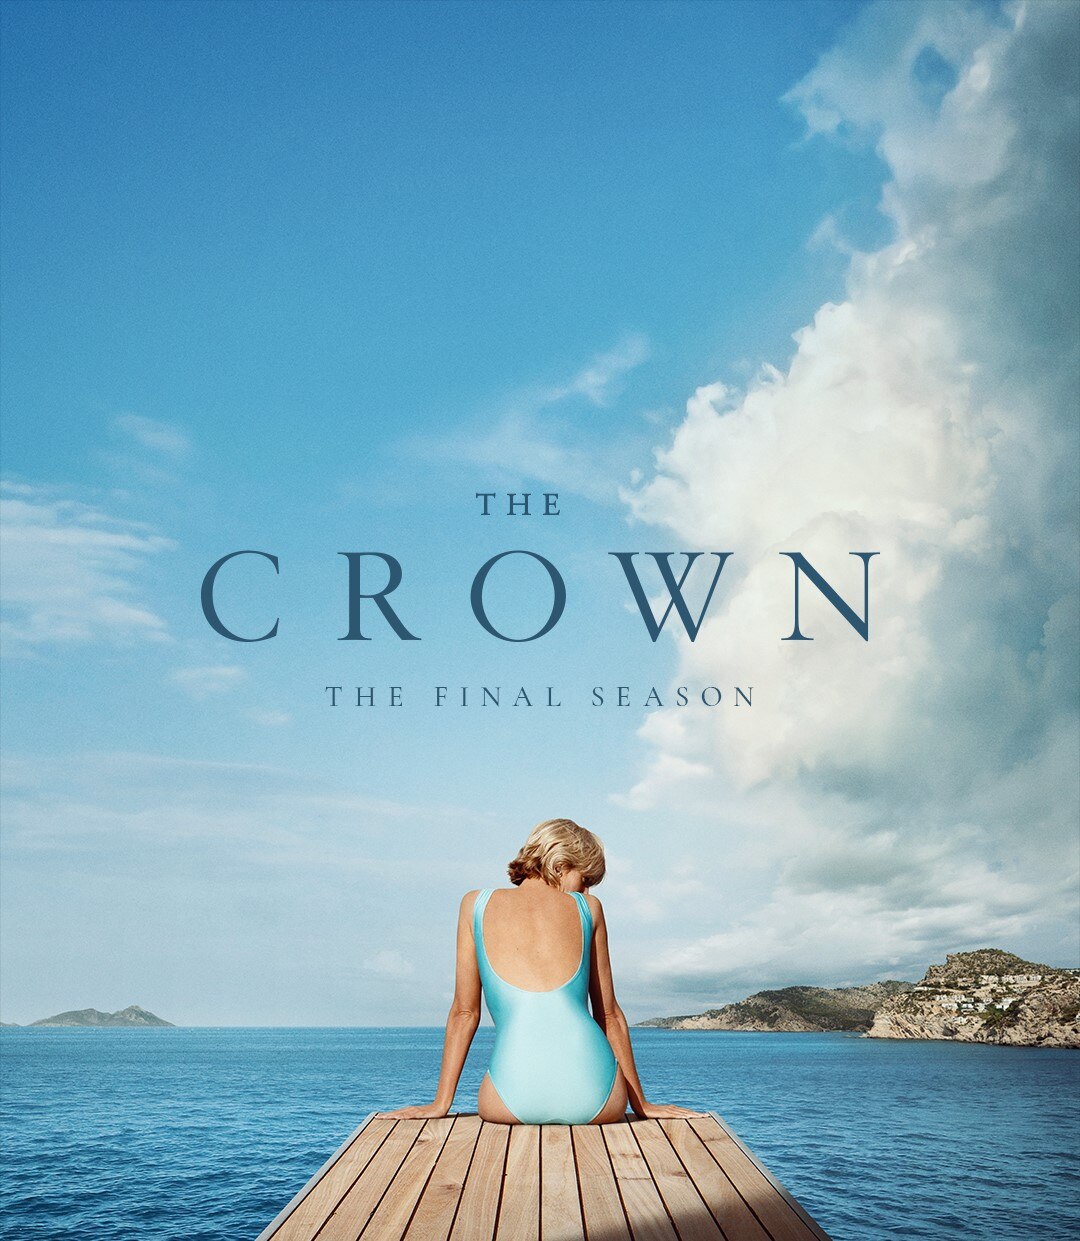 Elizabeth Debicki wearing a blue swimsuit, sitting on a diving board in a poster for The Crown